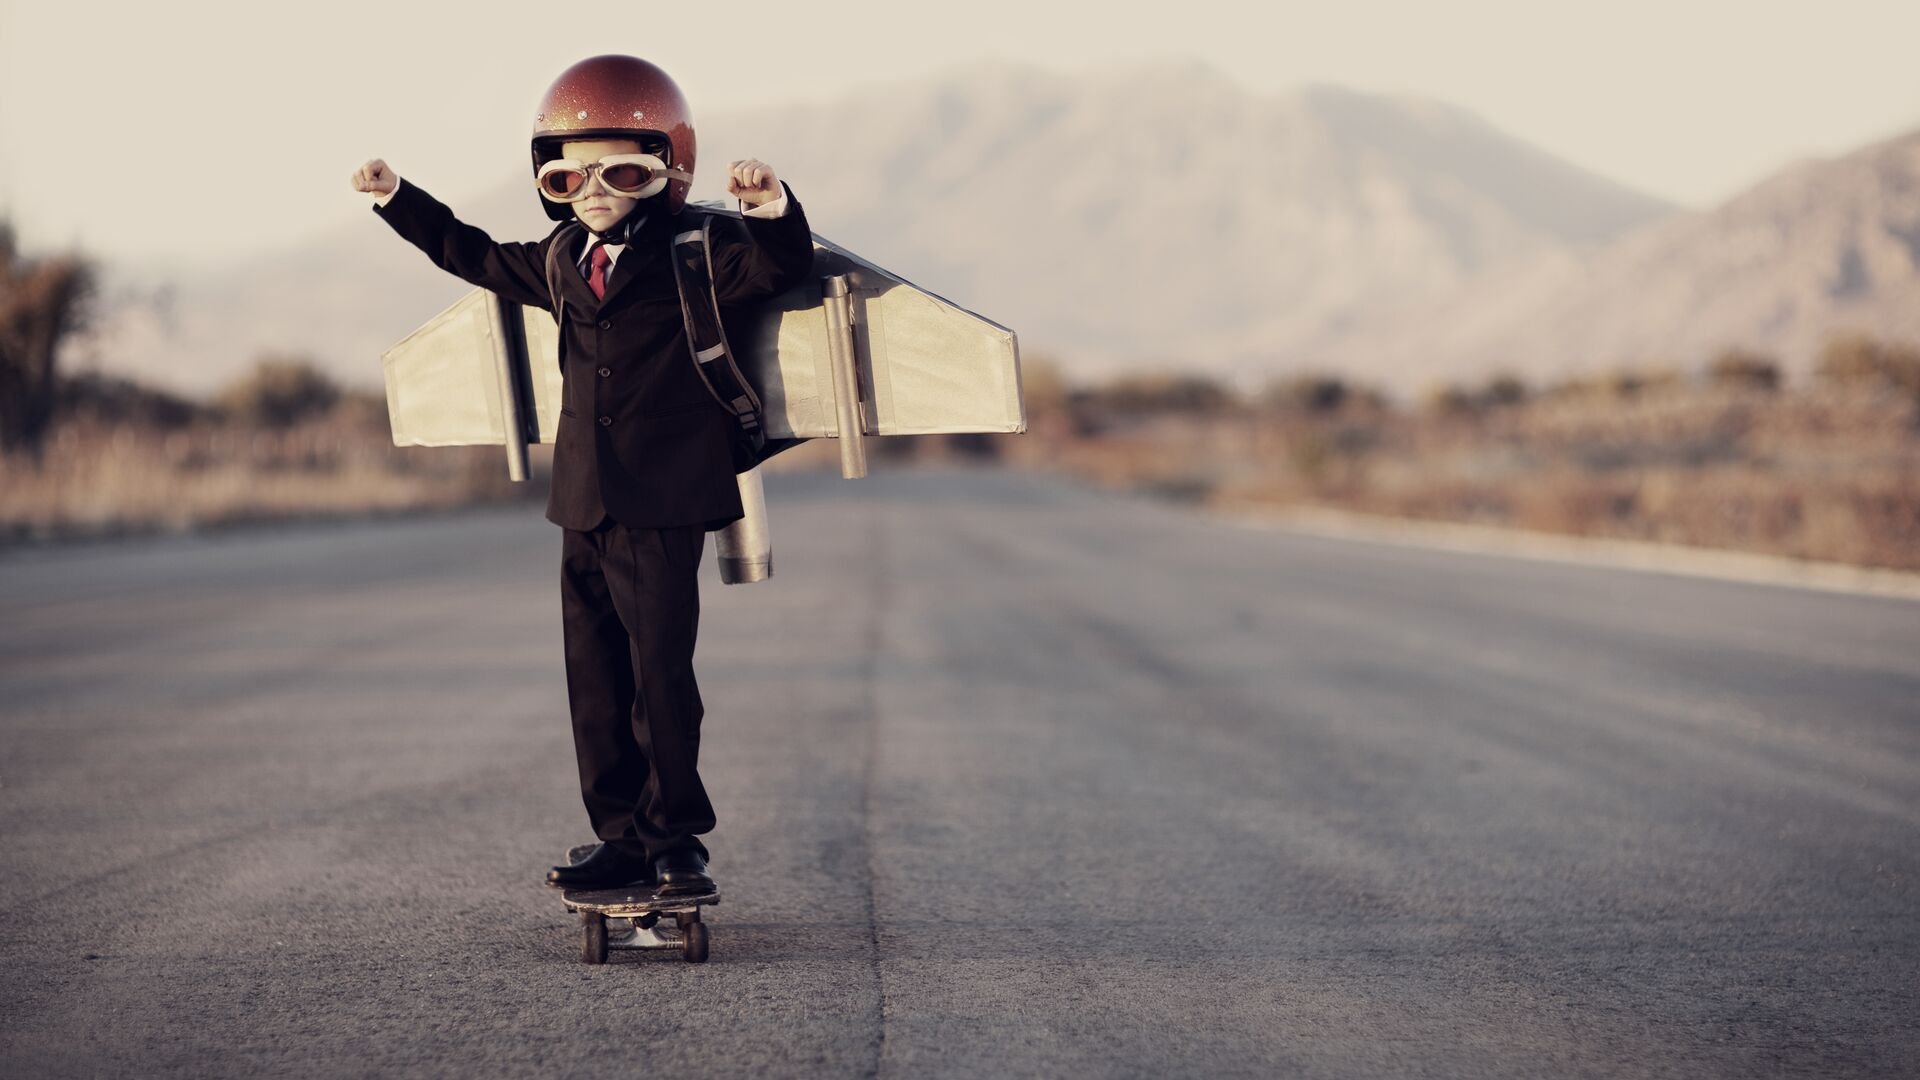 Young boy wearing business suit and jet pack on skateboard